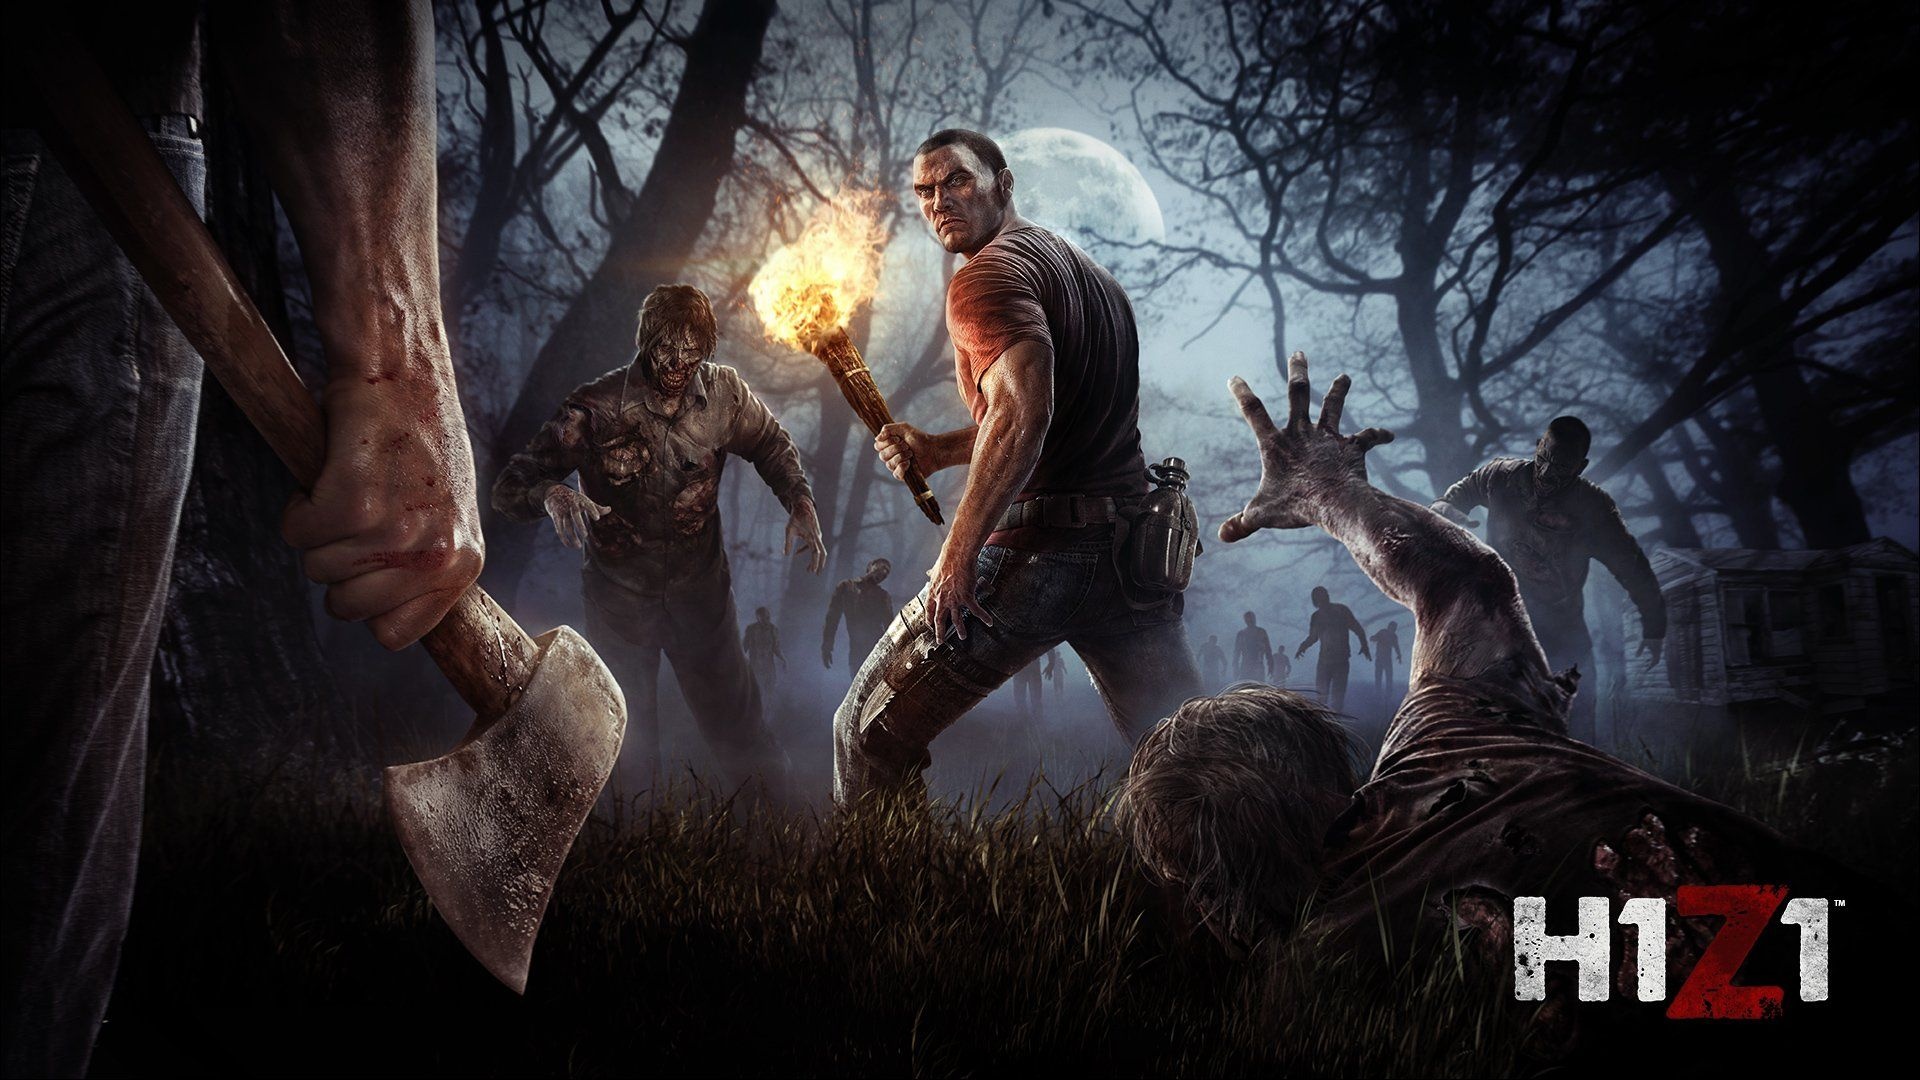 H1Z1 gaming, Top wallpapers, Competitive backgrounds, Multiplayer shootout, 1920x1080 Full HD Desktop